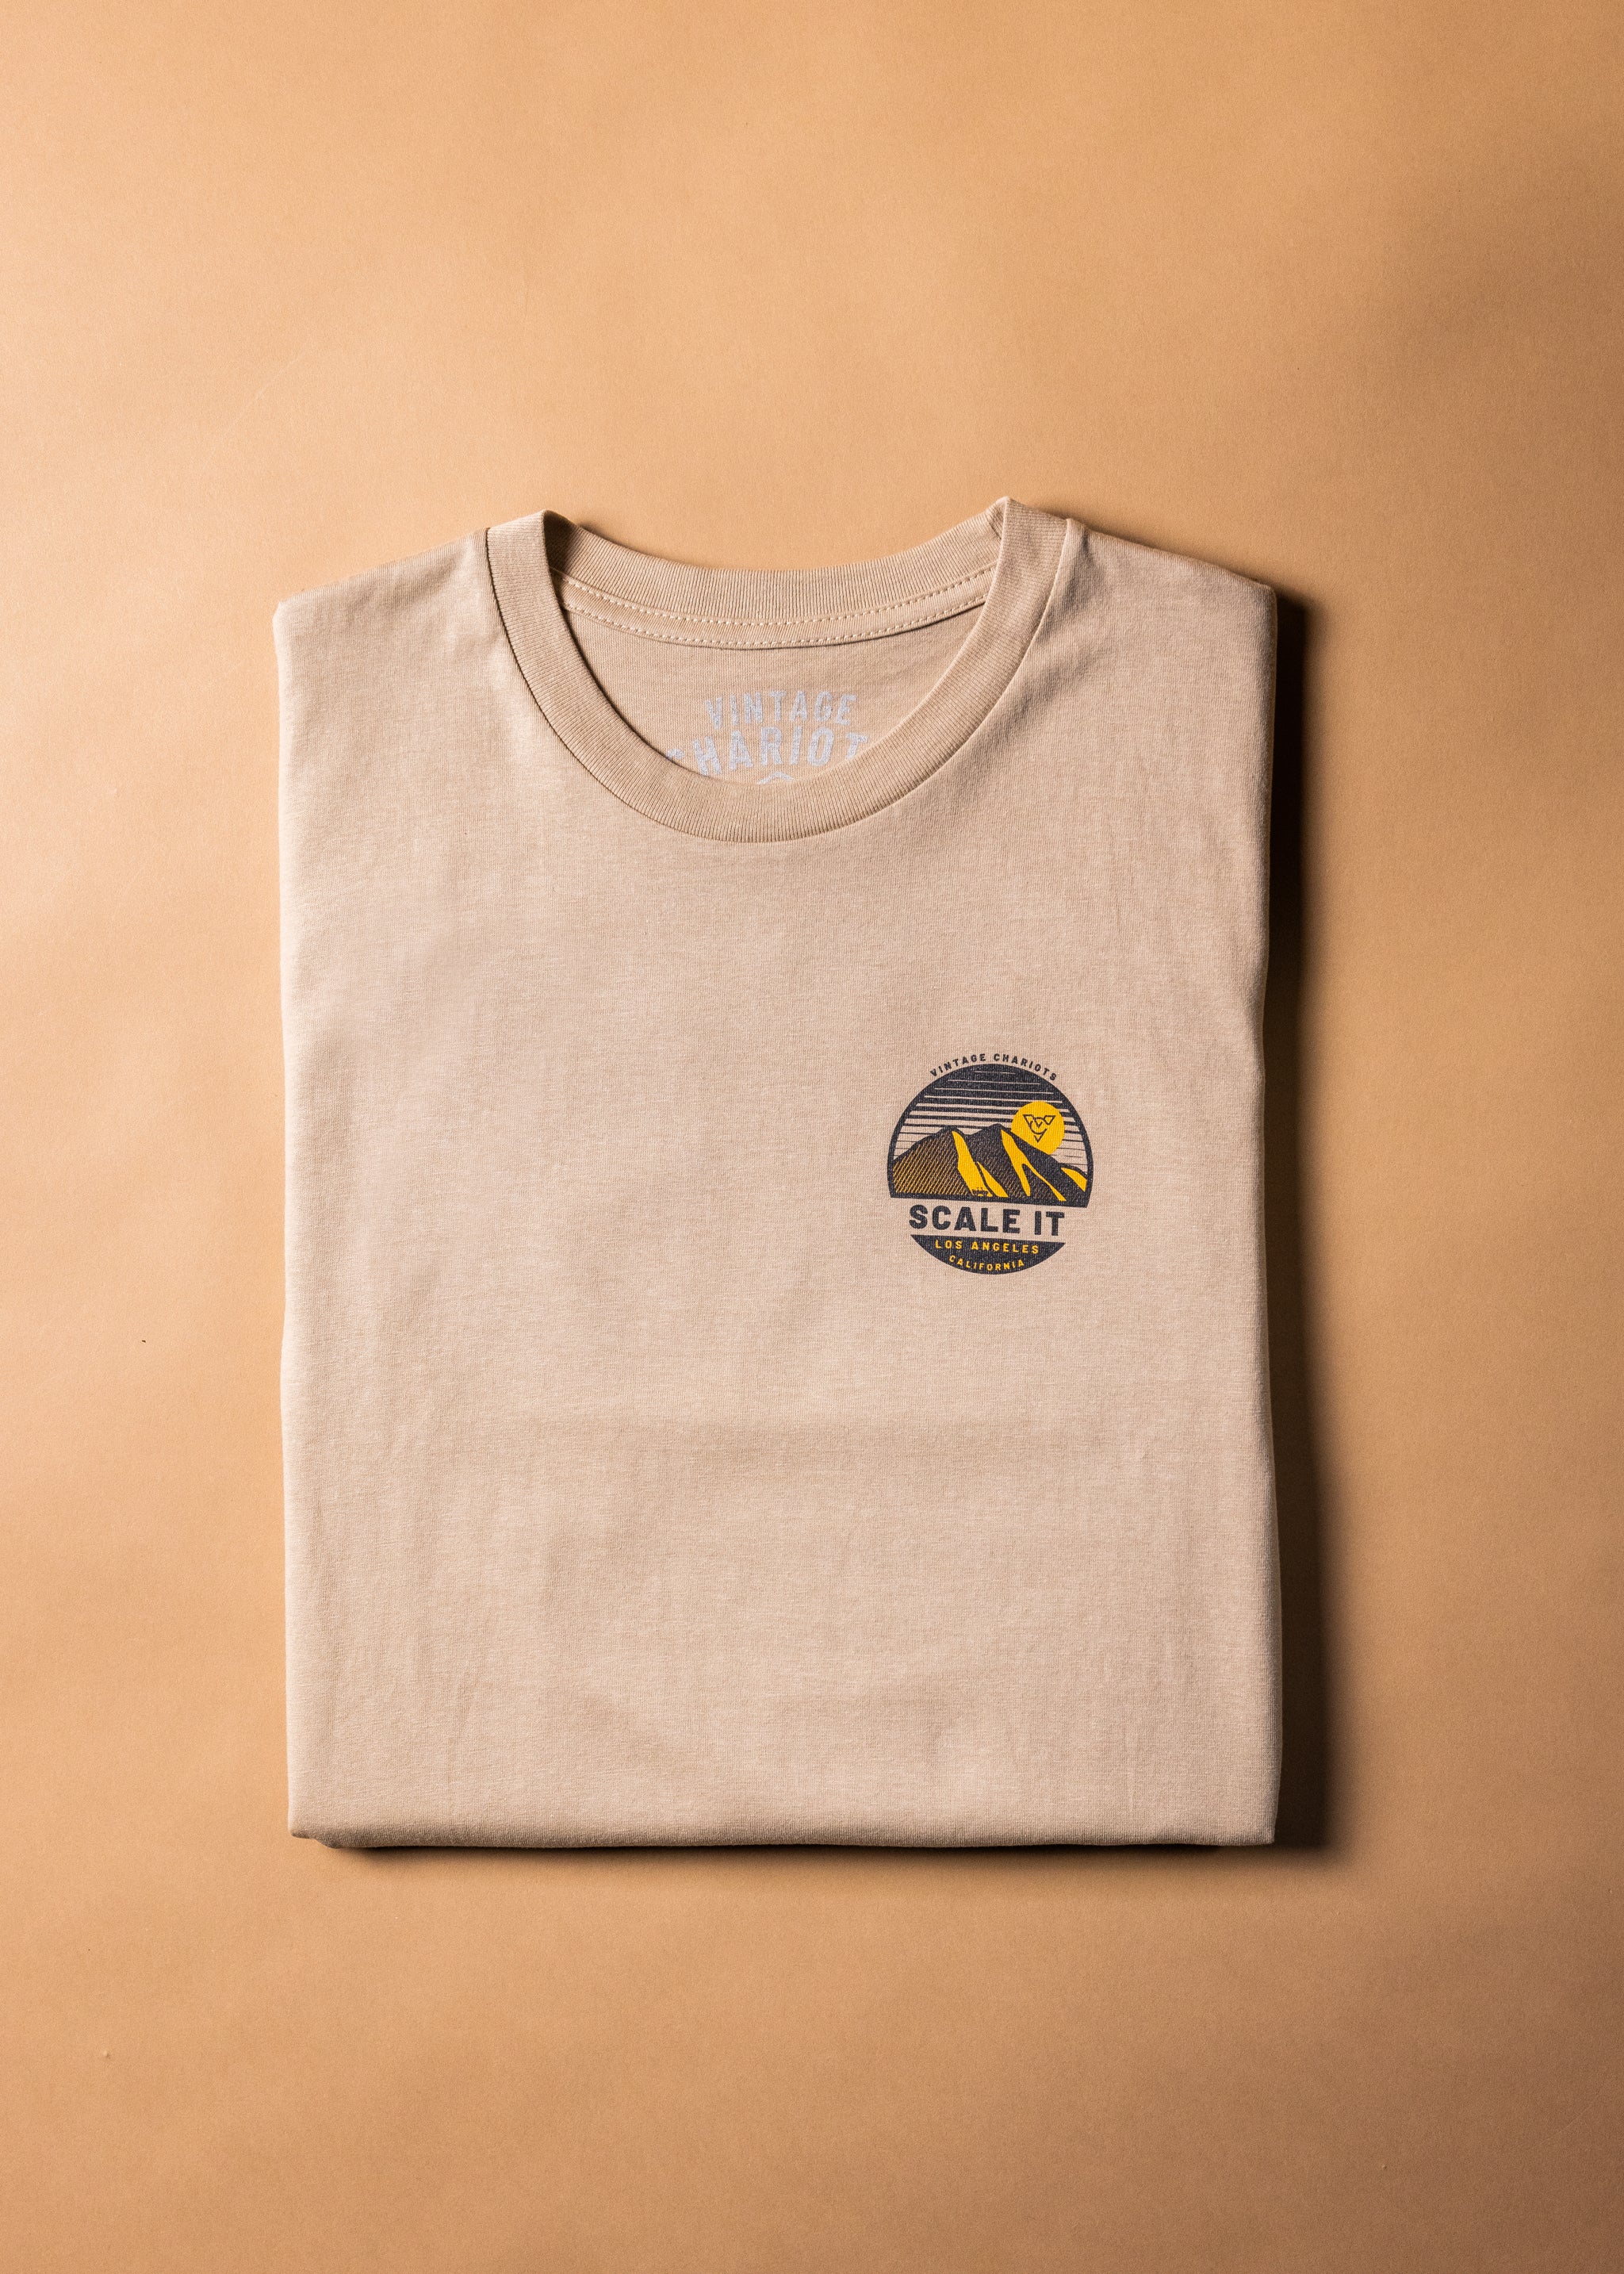 SCALE IT TEE (Sand)